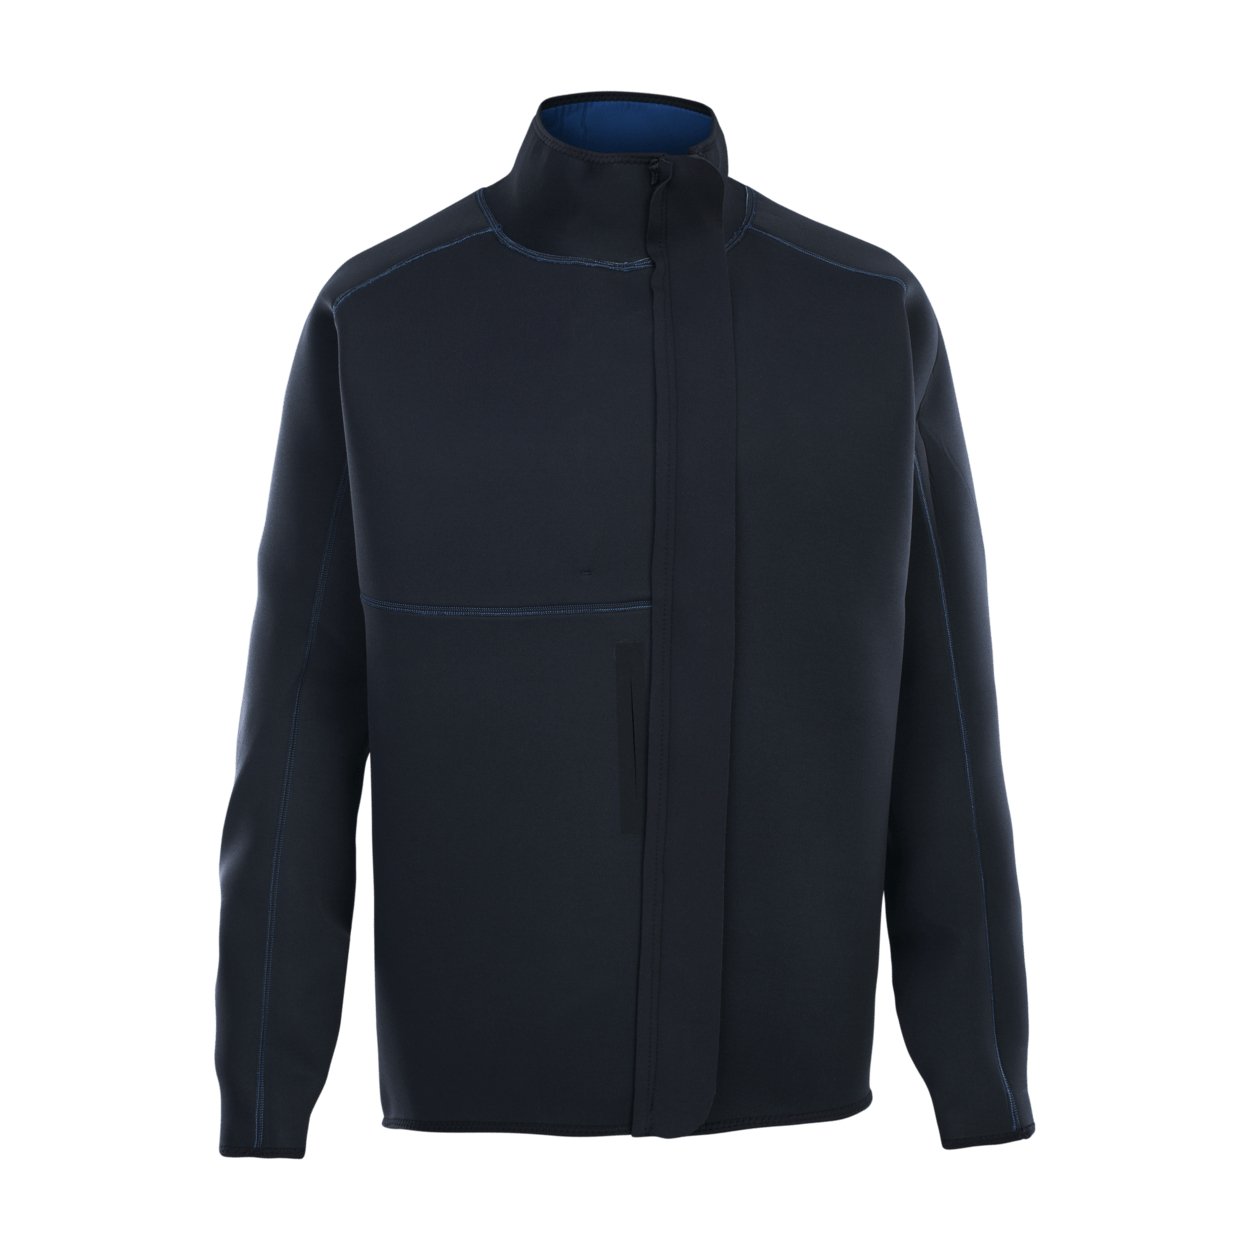 ION Neo Cruise Jacket men 2023 - Worthing Watersports - 9010583118604 - Tops - ION Water